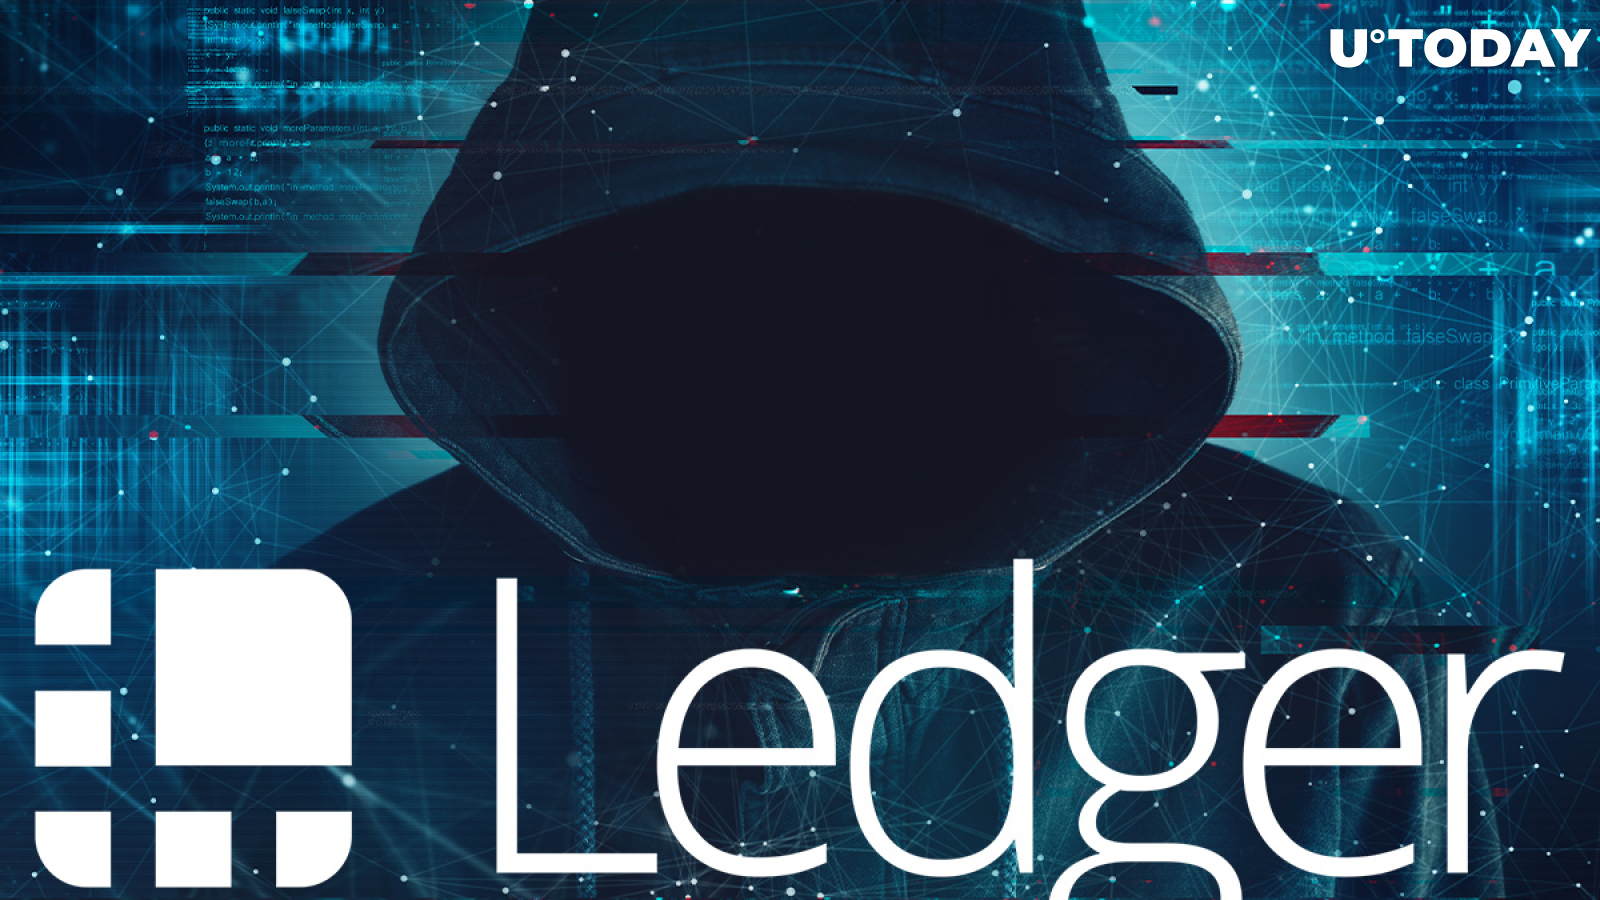 Ledger Wallet Data Leakage Victim Gets Blackmailed Over Their Crypto Holdings: Reddit